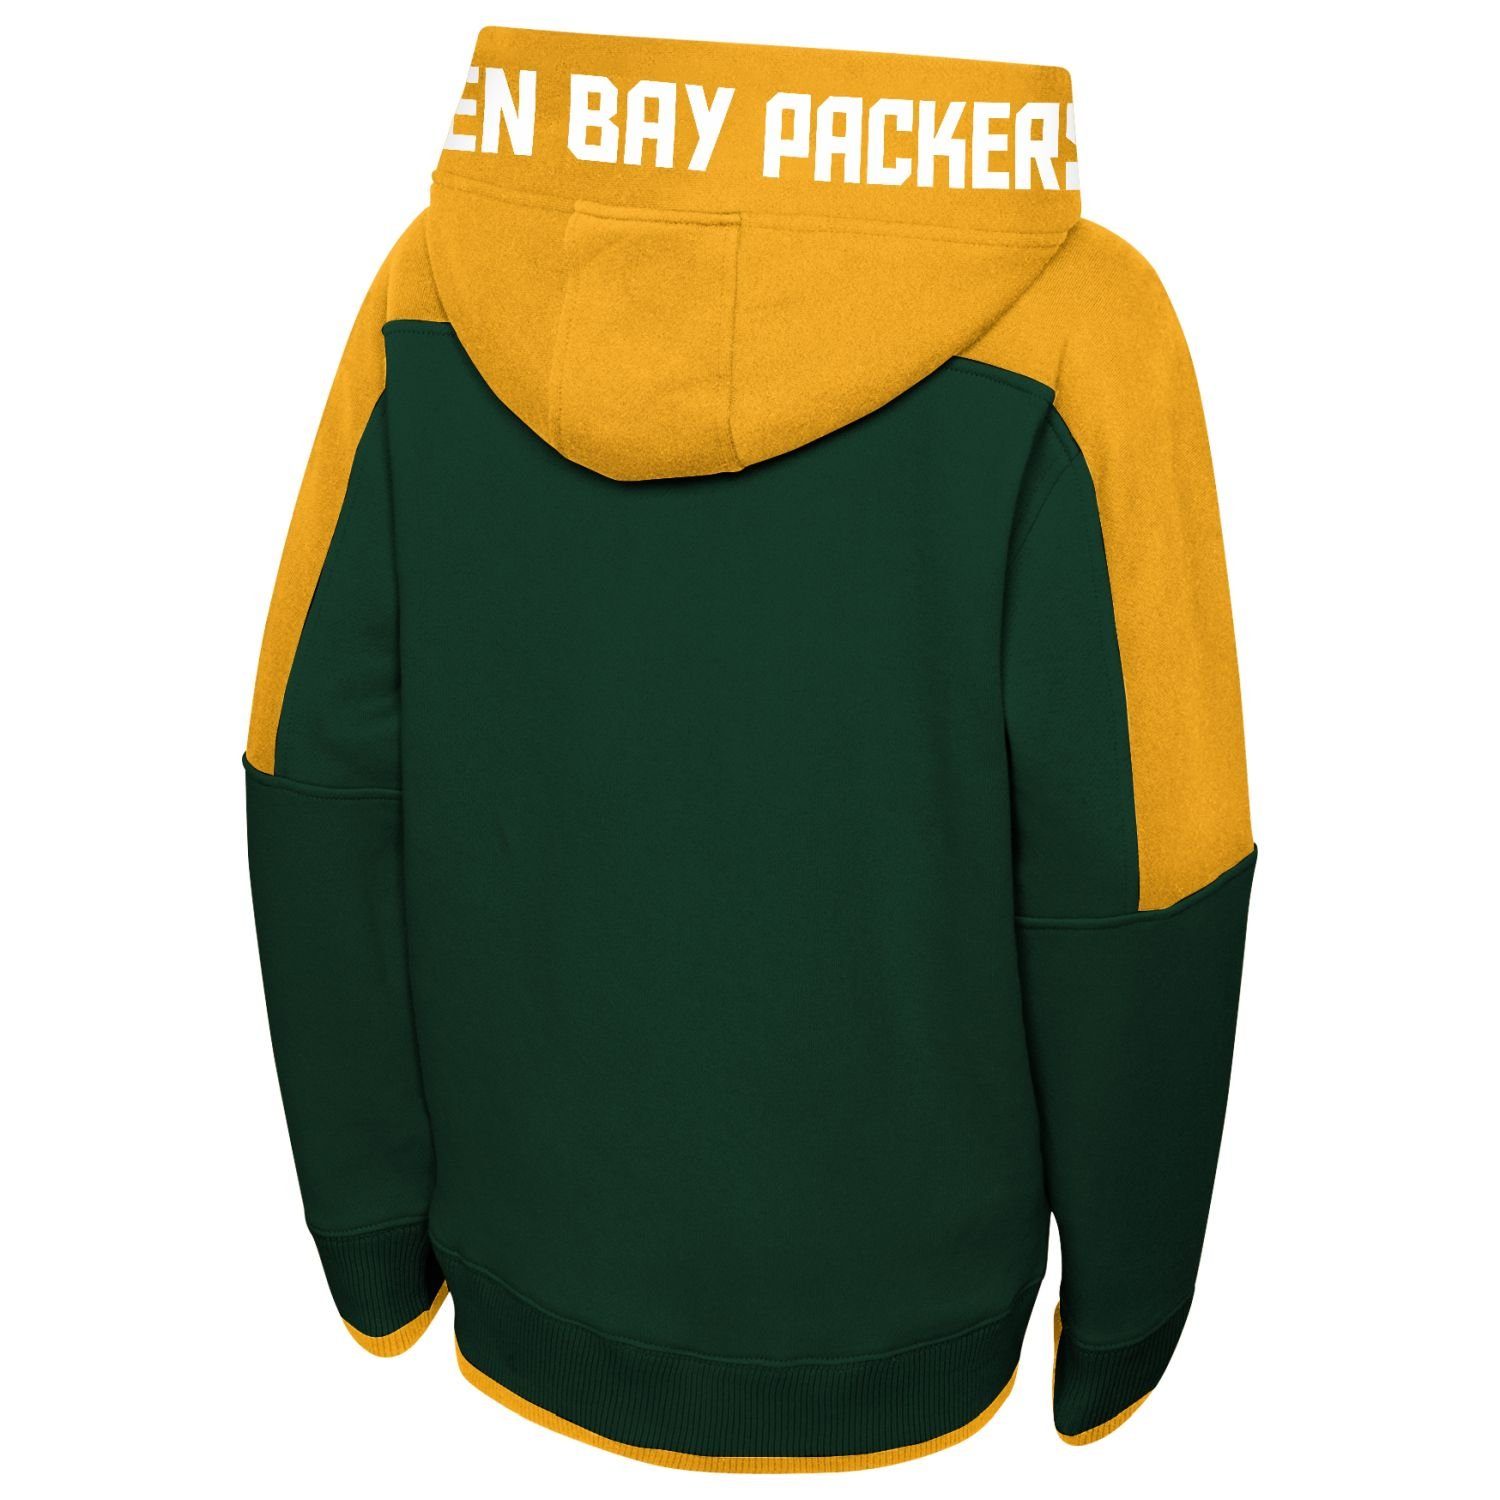 Outerstuff NFL Bay Kapuzenpullover Packers Green POST UP